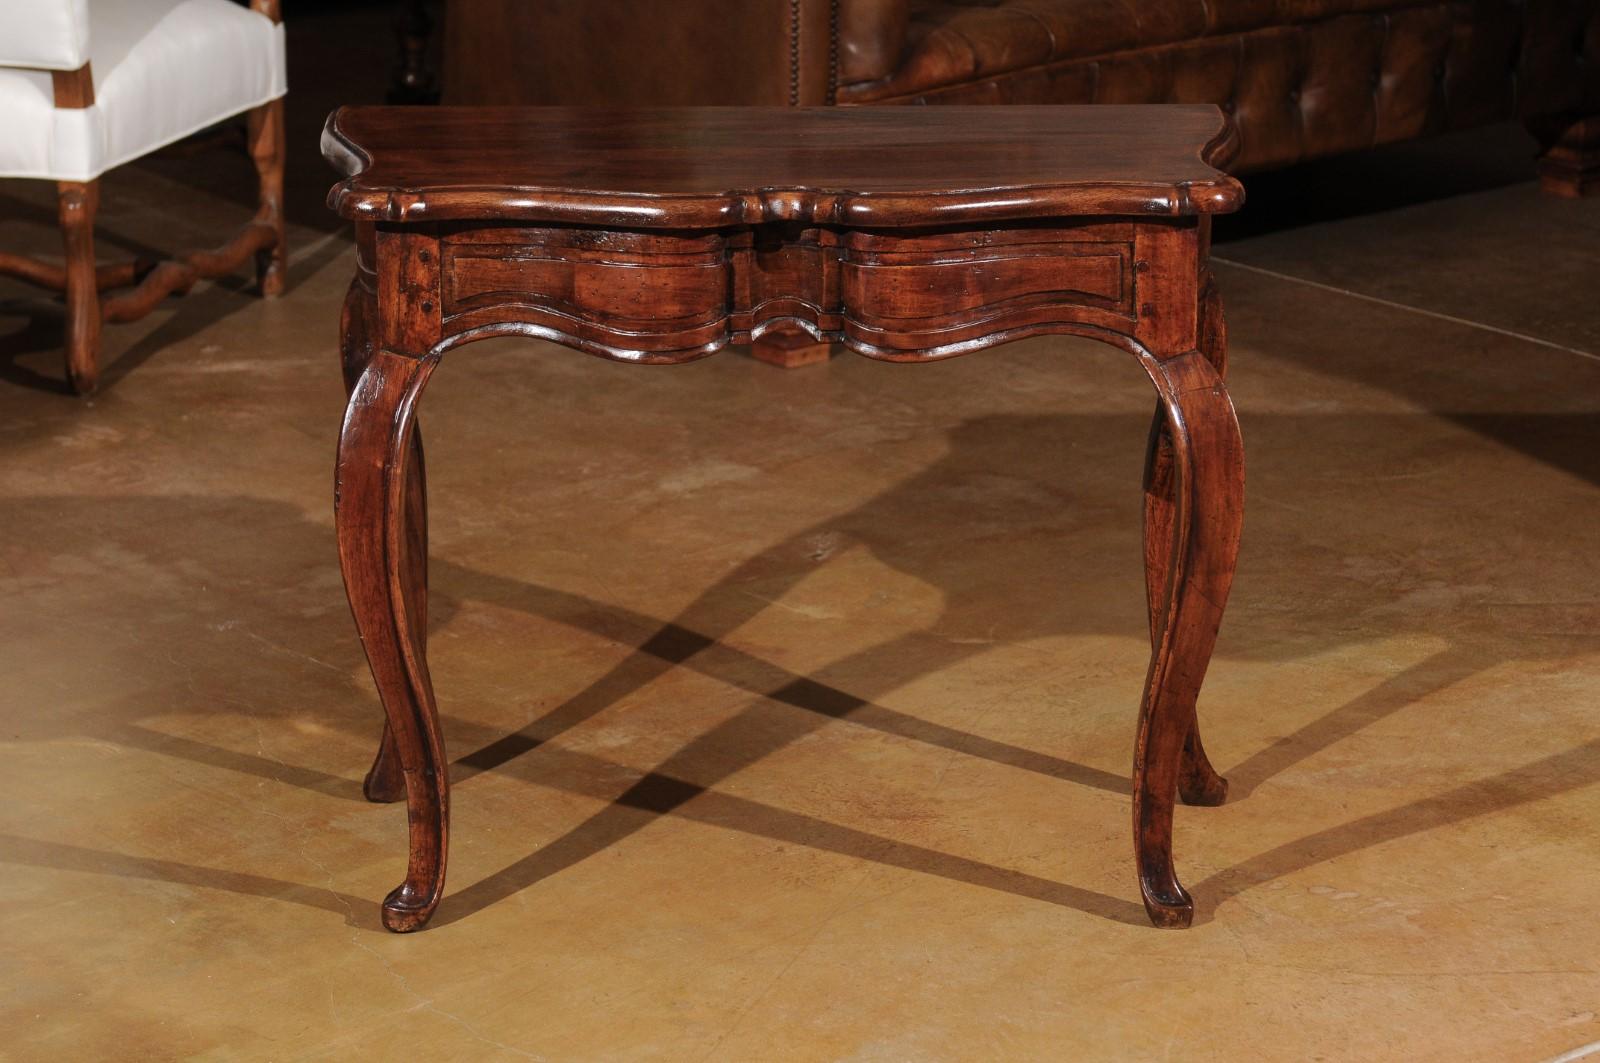 A French Louis XV period walnut console table from the mid 18th century, with cabriole legs. Born during the reign of king Louis XV, the 